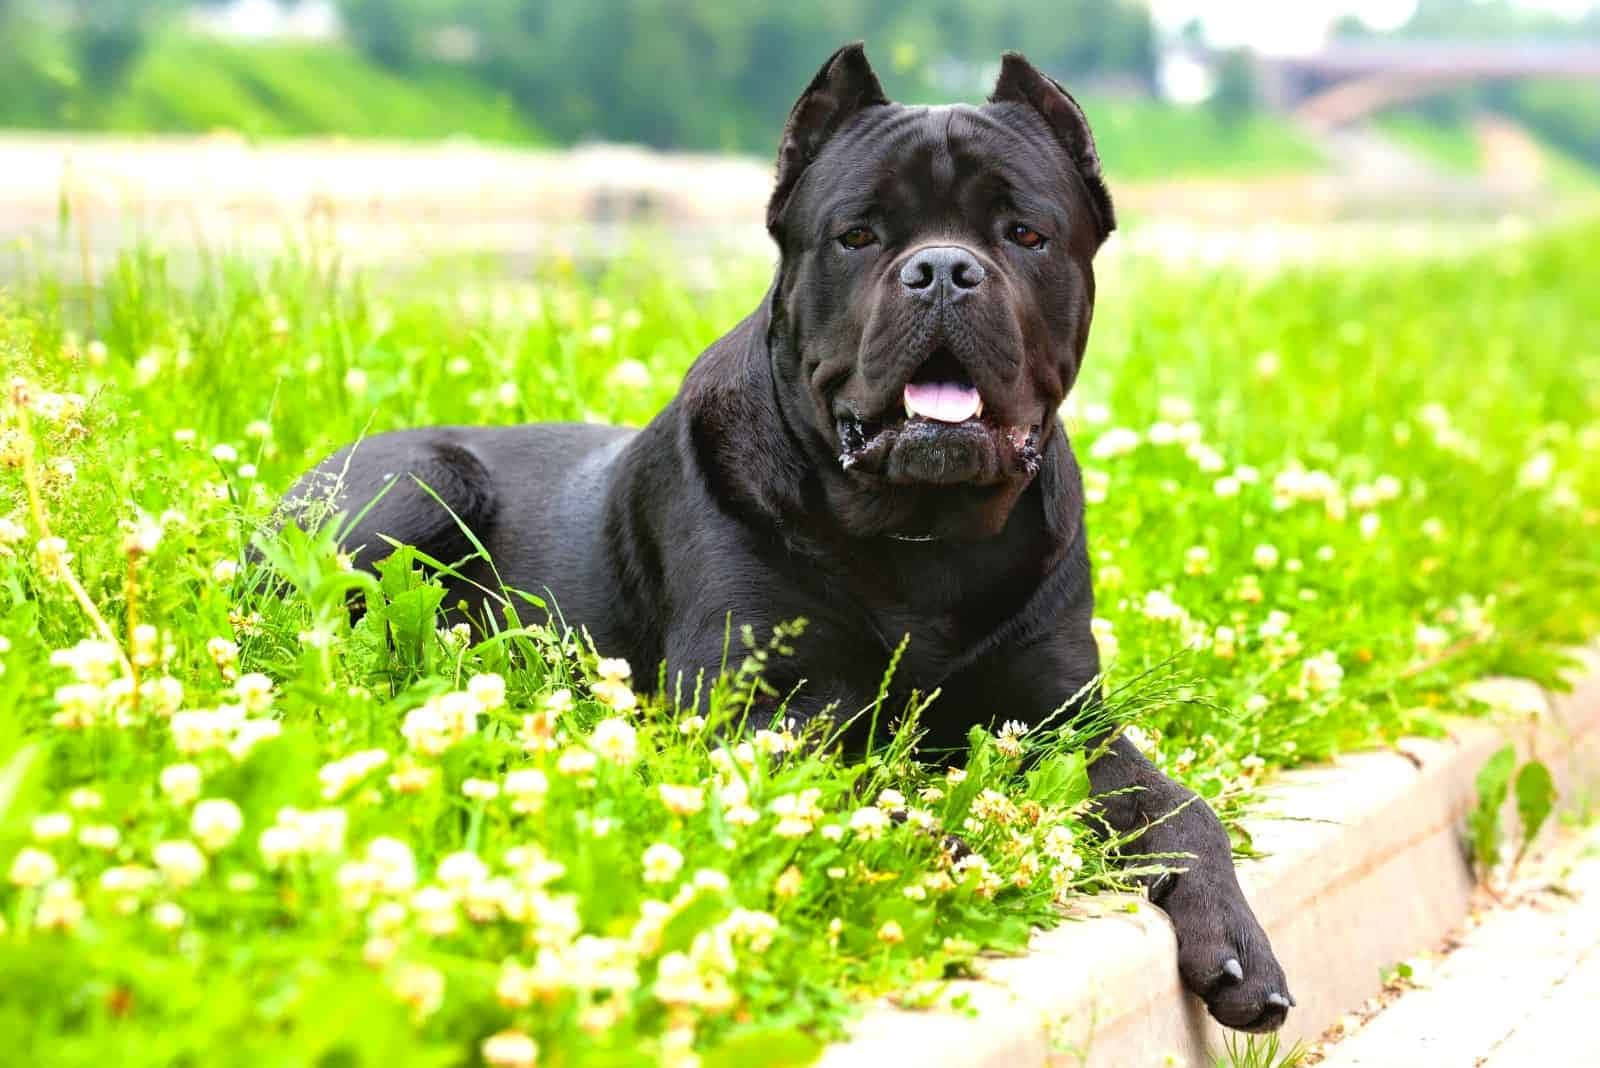 "This loyal and devoted Cane Corso is ready for action!"